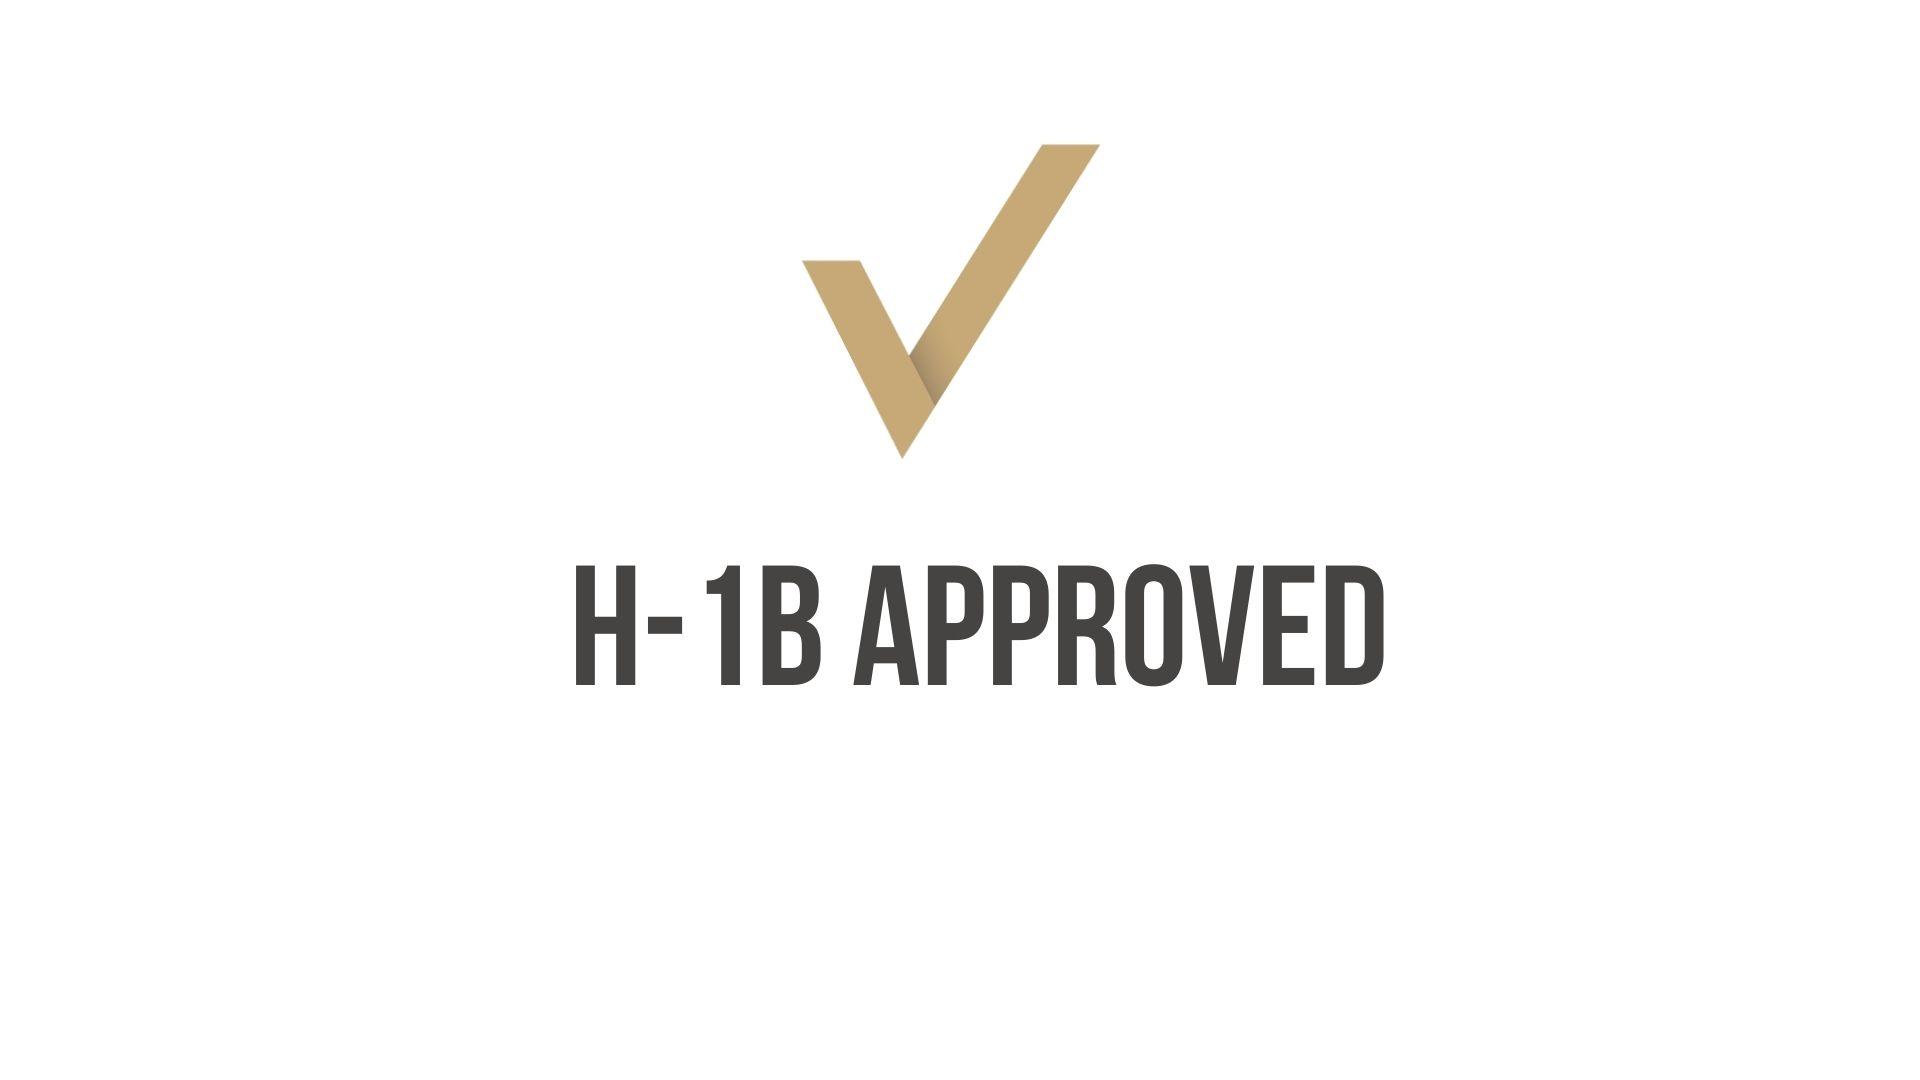 H-1B 3-year Extension Approval